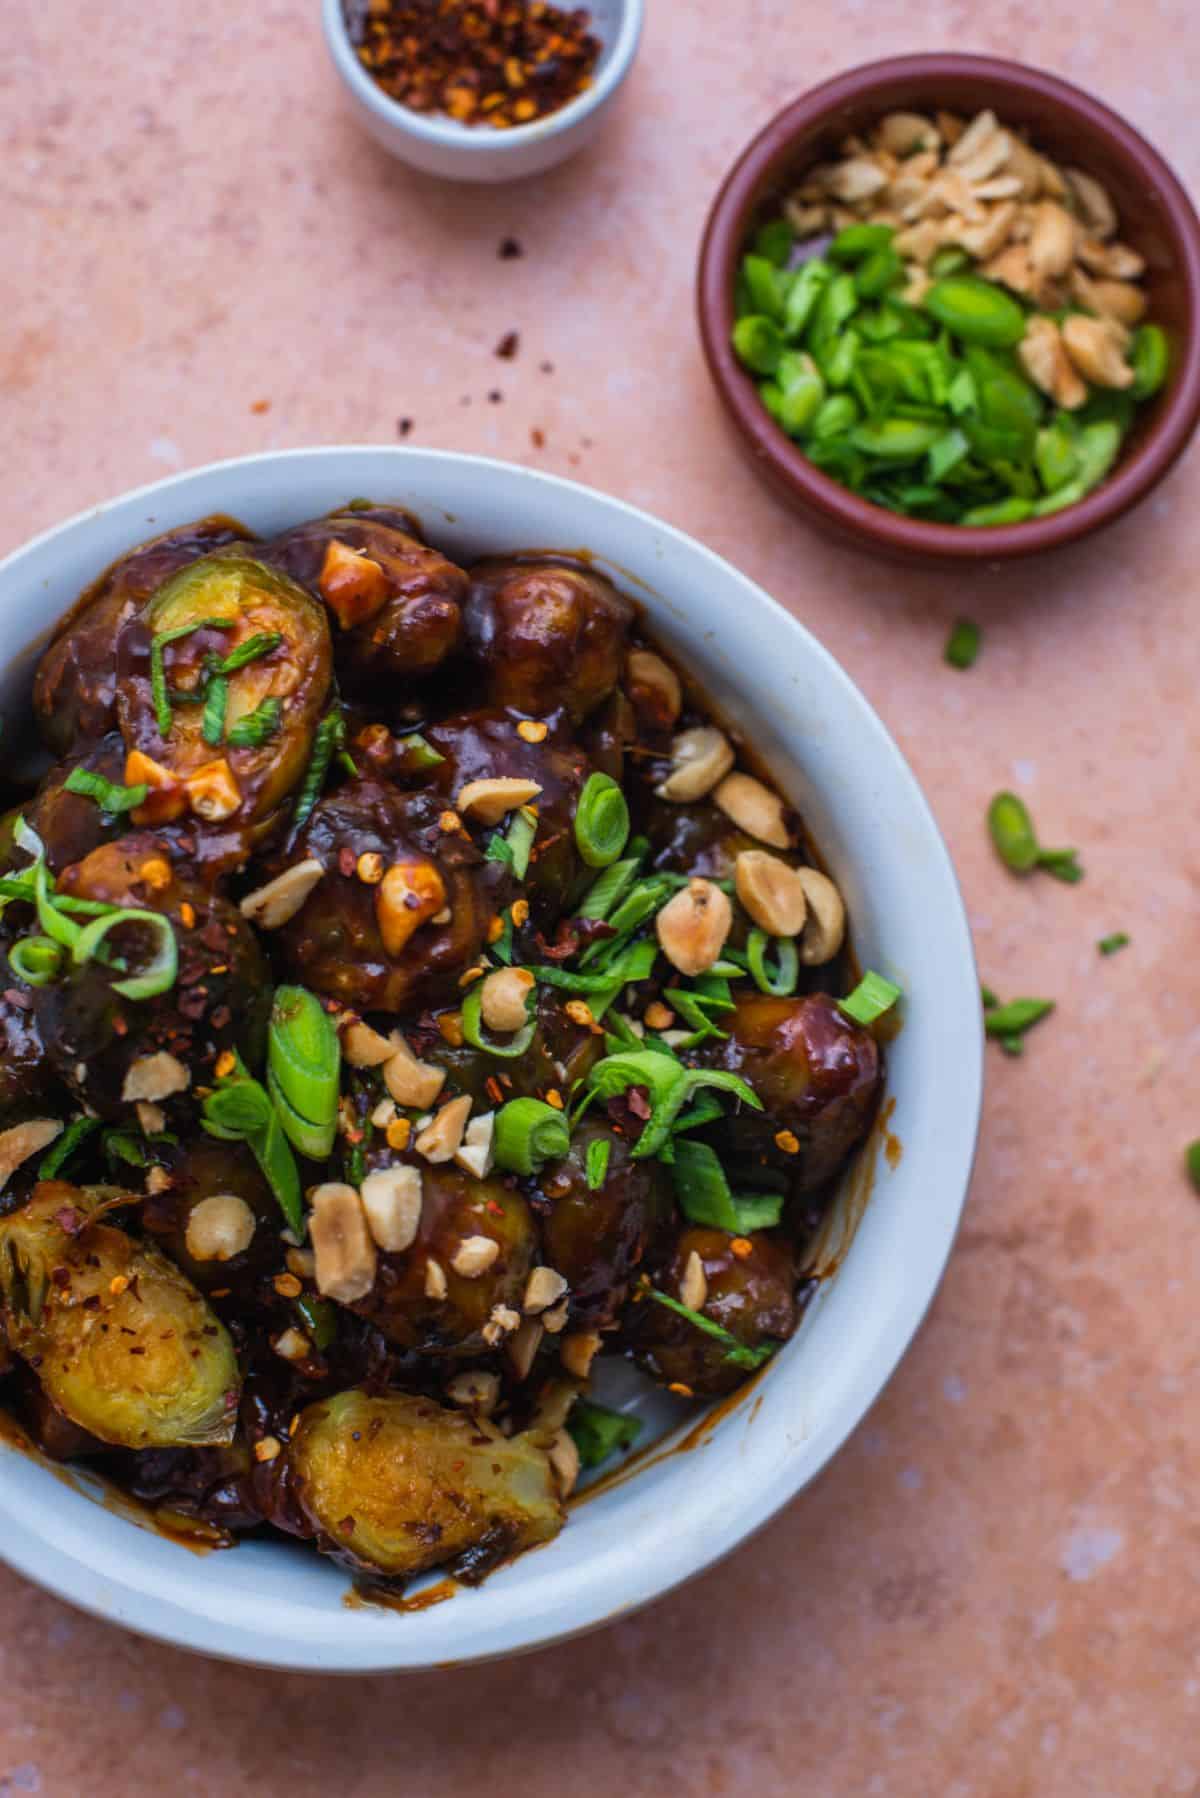 Kung pao brussel sprouts 3